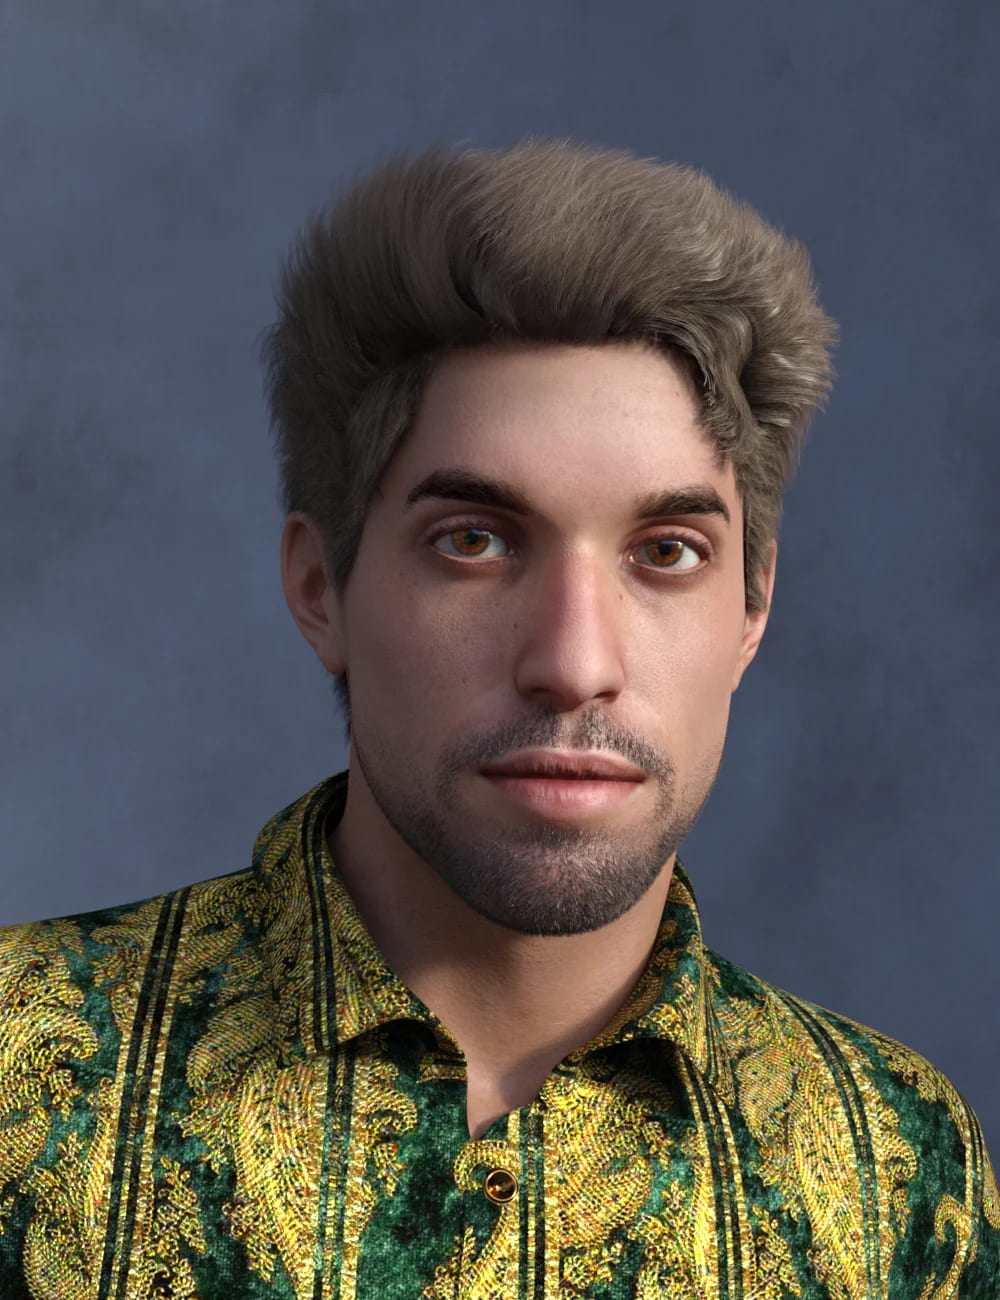 Mick, Hair and dForce Outfit for Mick Genesis 8 and 8.1 Males_DAZ3DDL